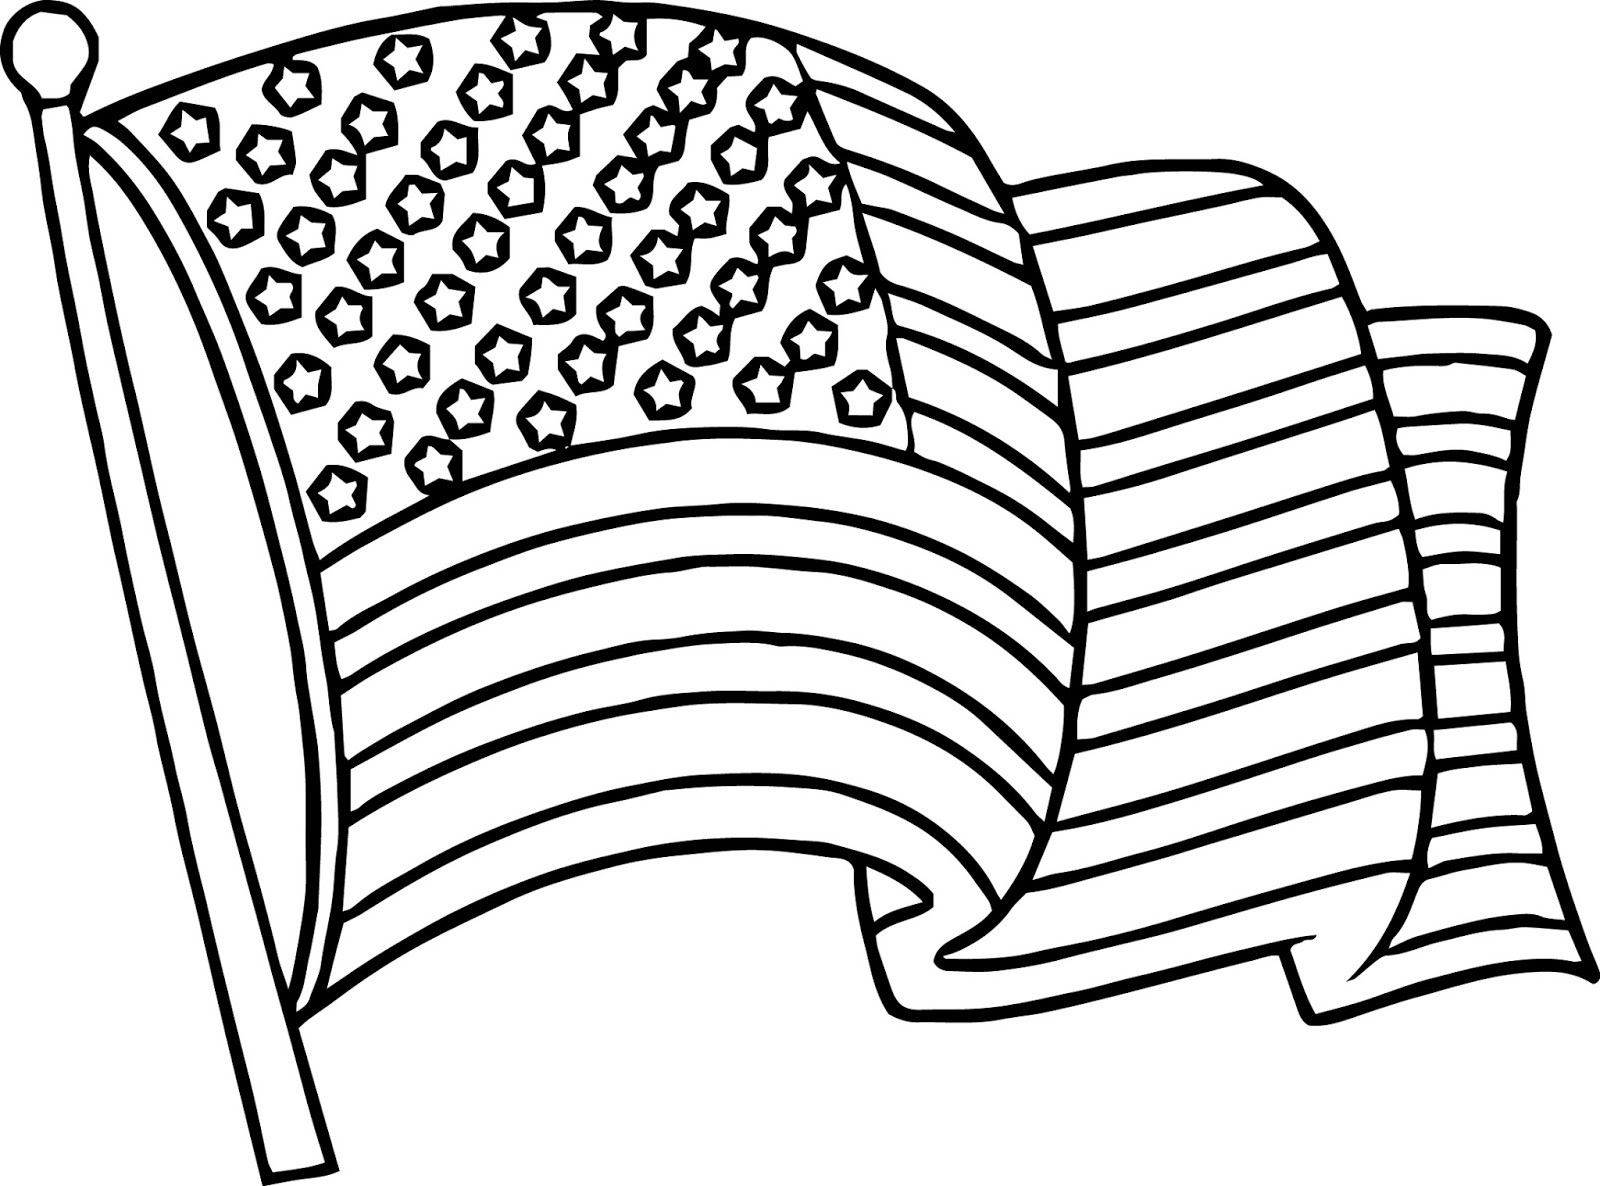 U.S.Flag Coloring Pages
 American Flag Coloring Pages Best Coloring Pages For Kids